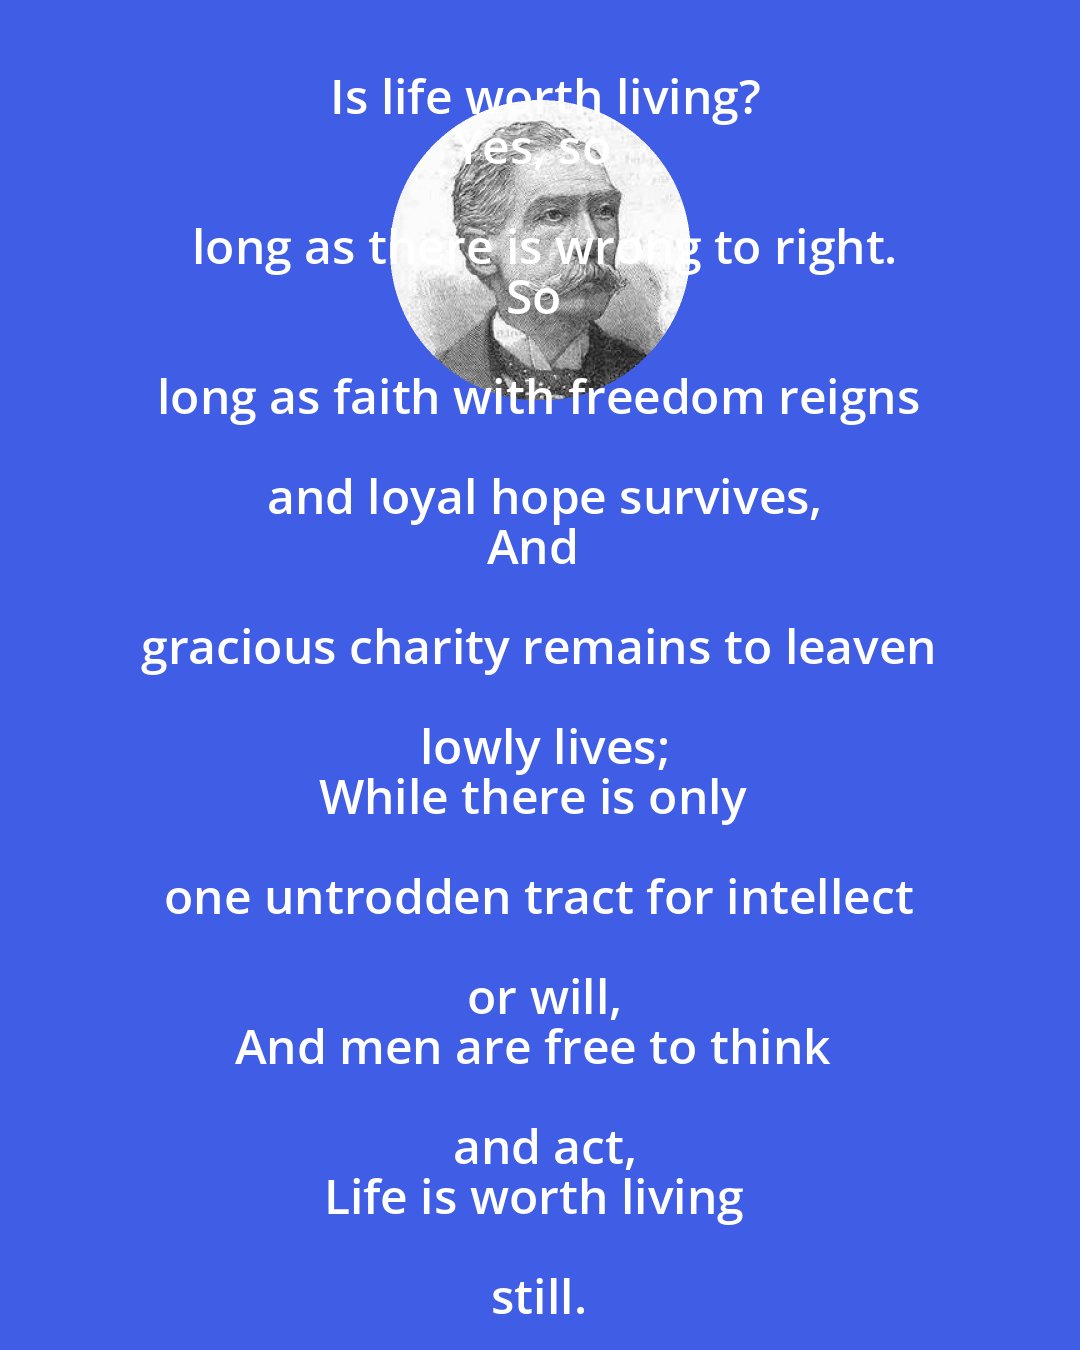 Alfred Austin: Is life worth living?
Yes, so long as there is wrong to right.
So long as faith with freedom reigns and loyal hope survives,
And gracious charity remains to leaven lowly lives;
While there is only one untrodden tract for intellect or will,
And men are free to think and act,
Life is worth living still.